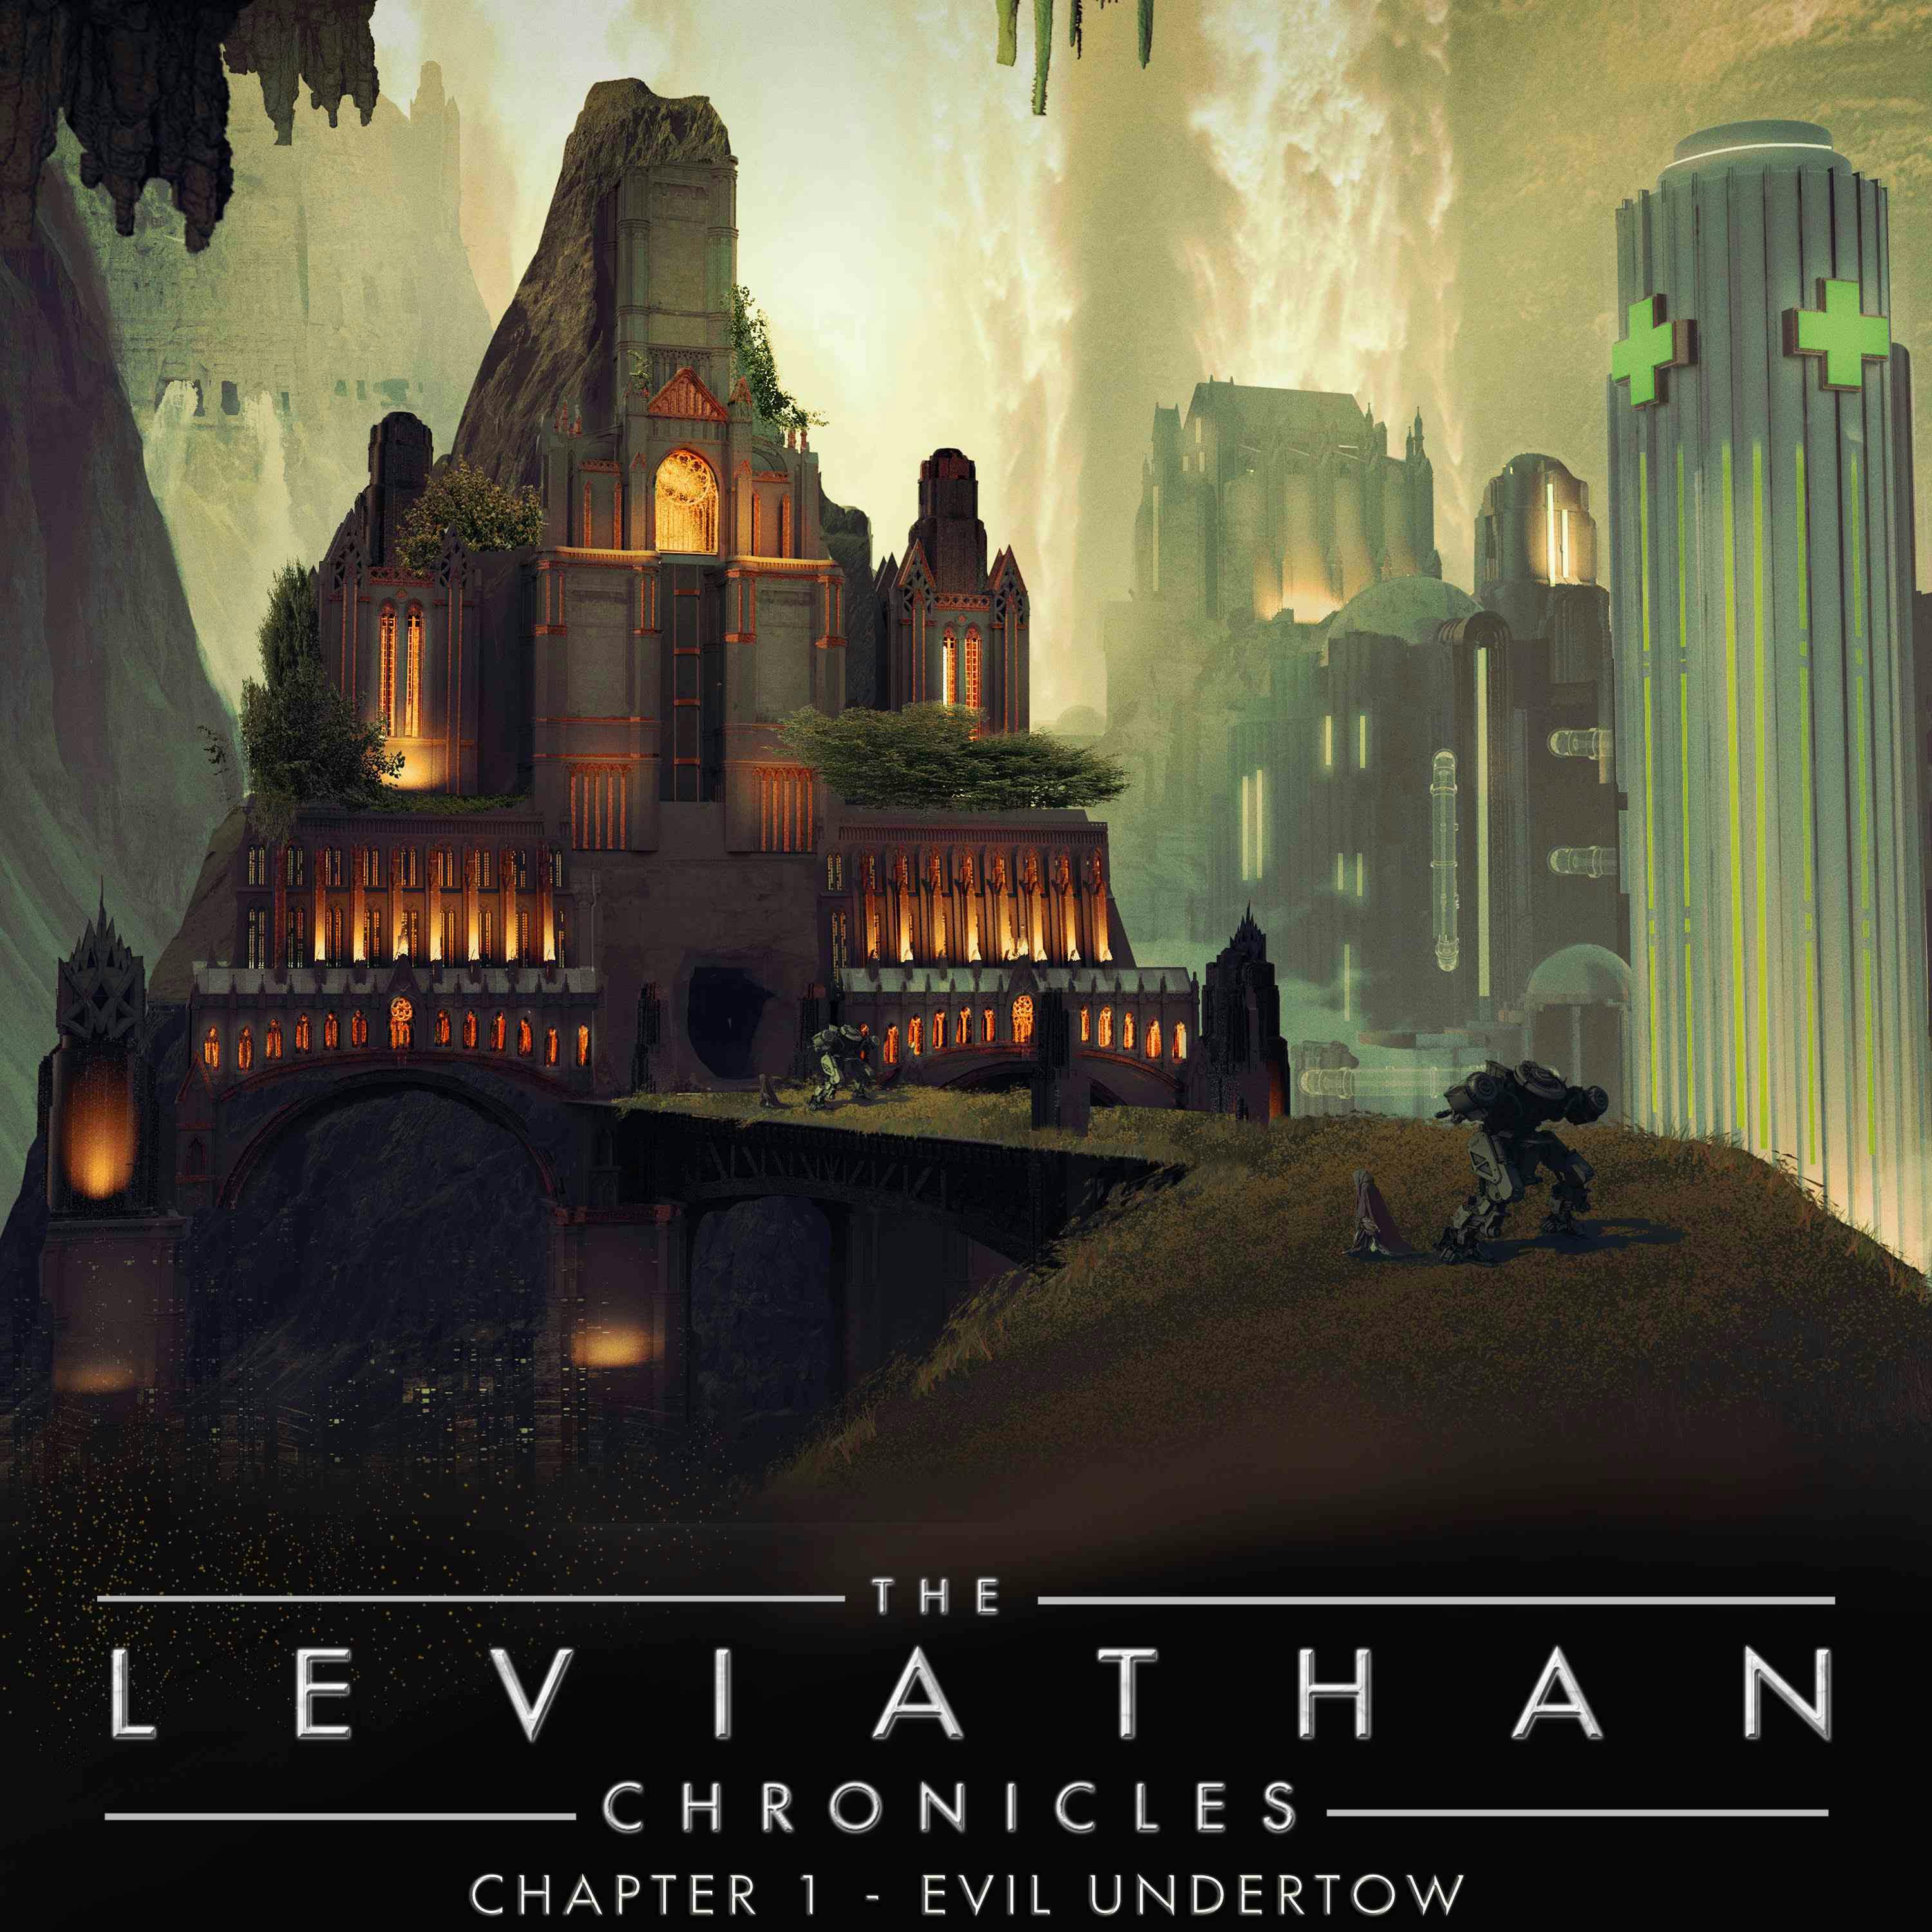 The Leviathan Chronicles | Chapter 1 - Evil Undertow